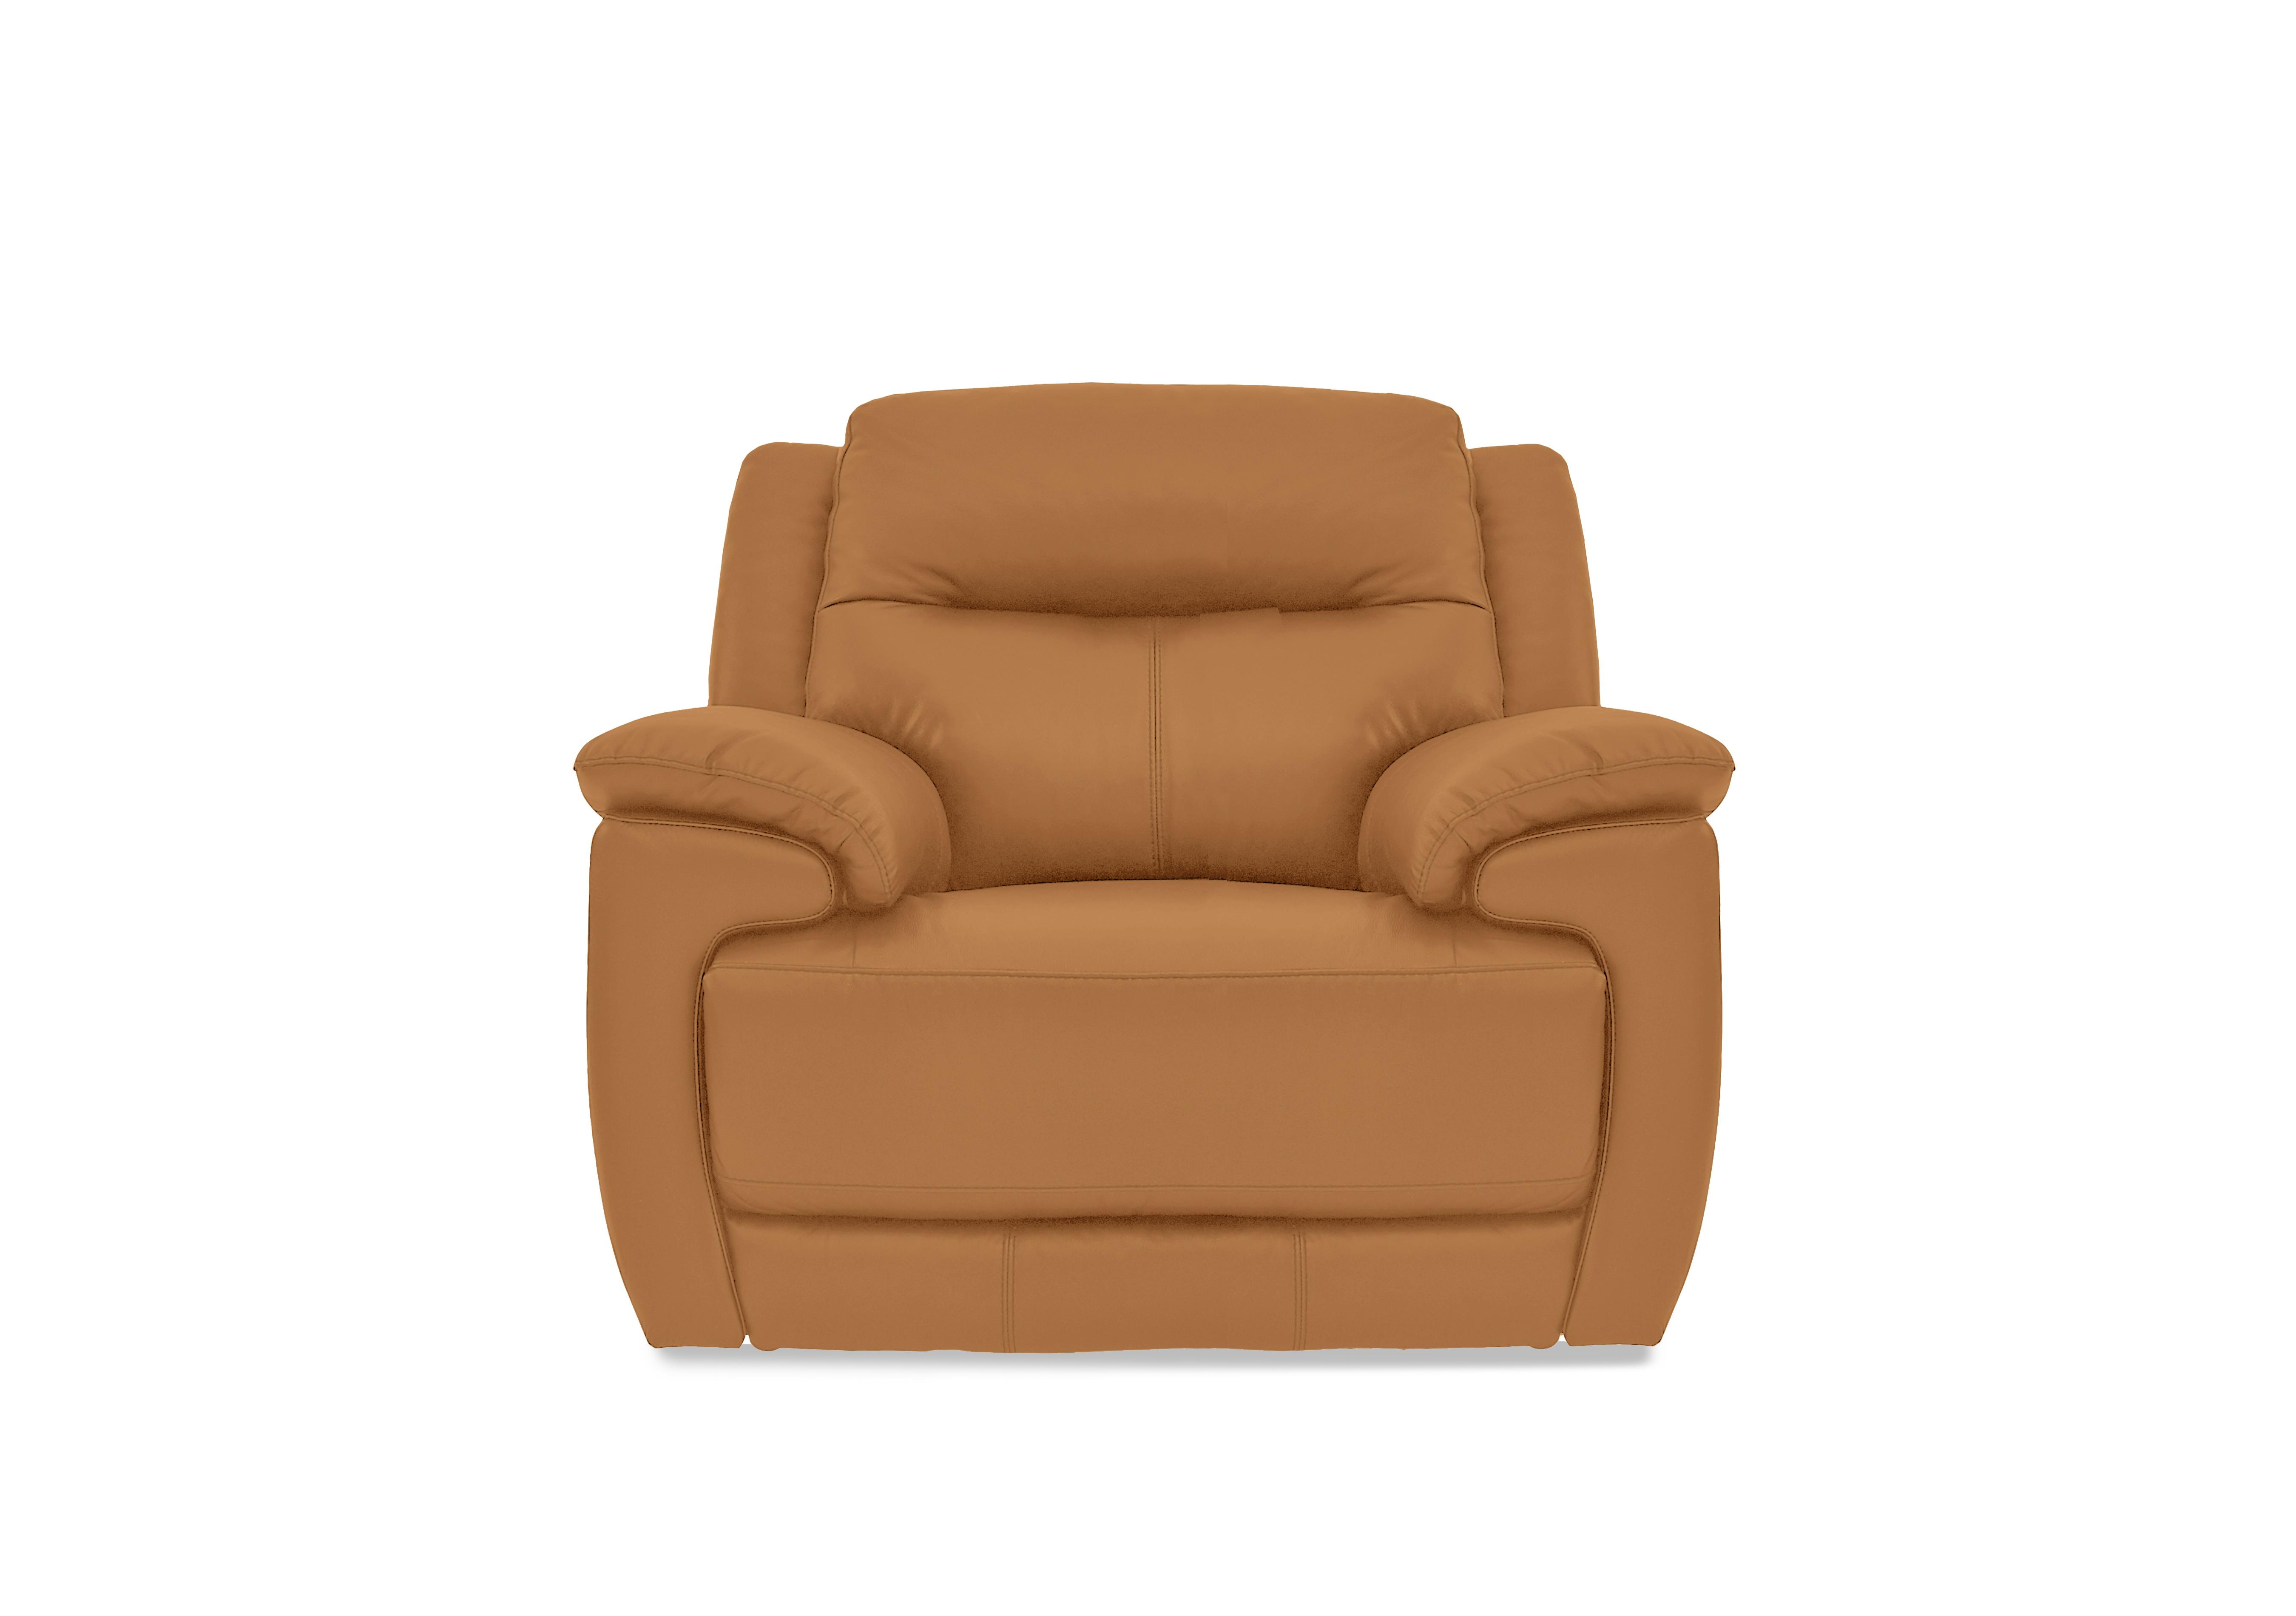 Touch Leather Armchair in Bv-335e Honey Yellow on Furniture Village